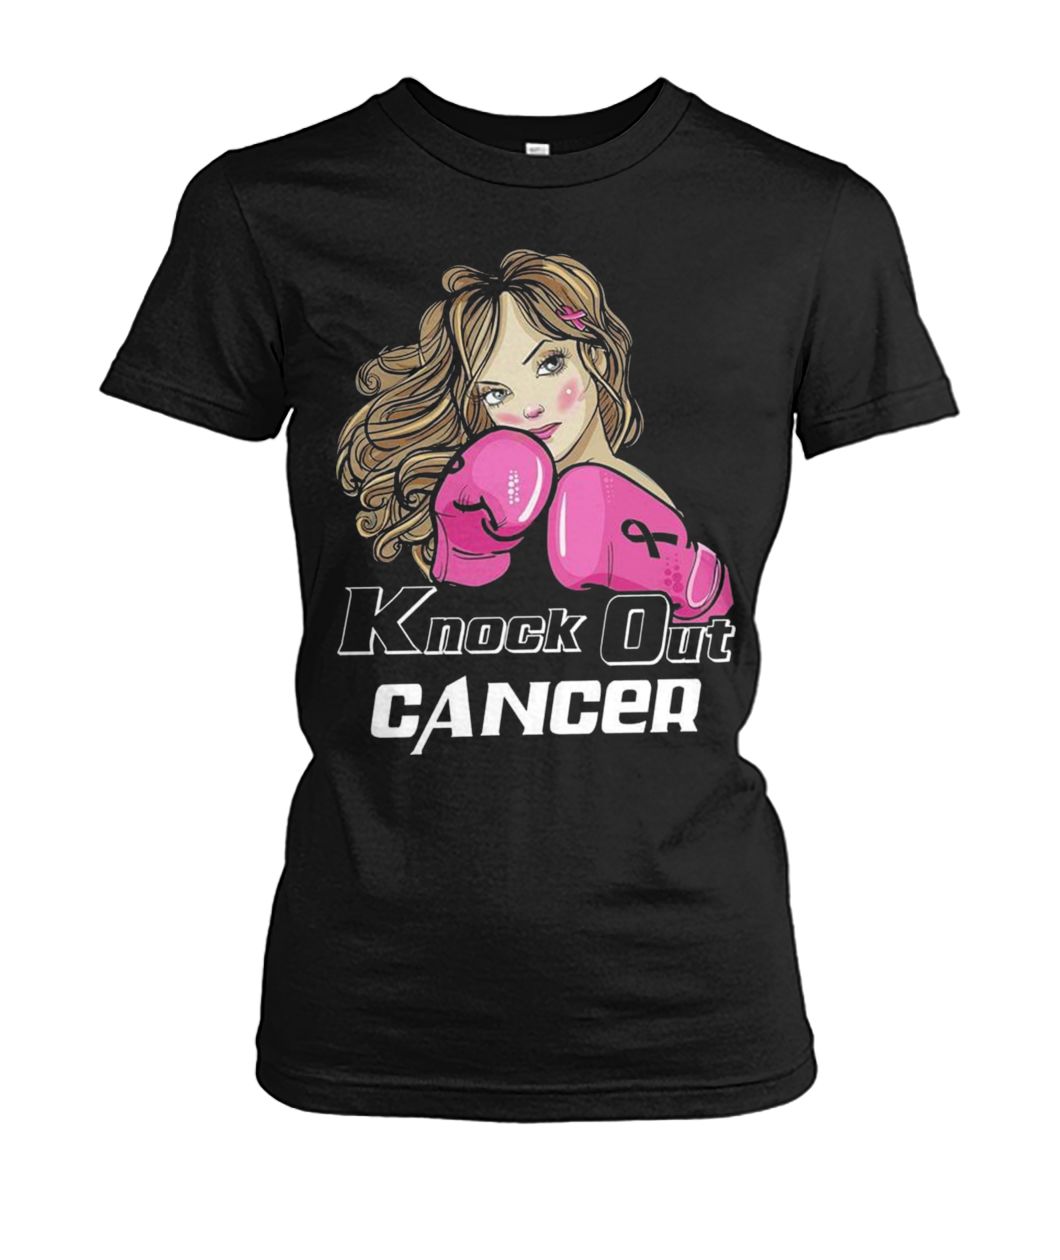 Knock out breast cancer women's crew tee